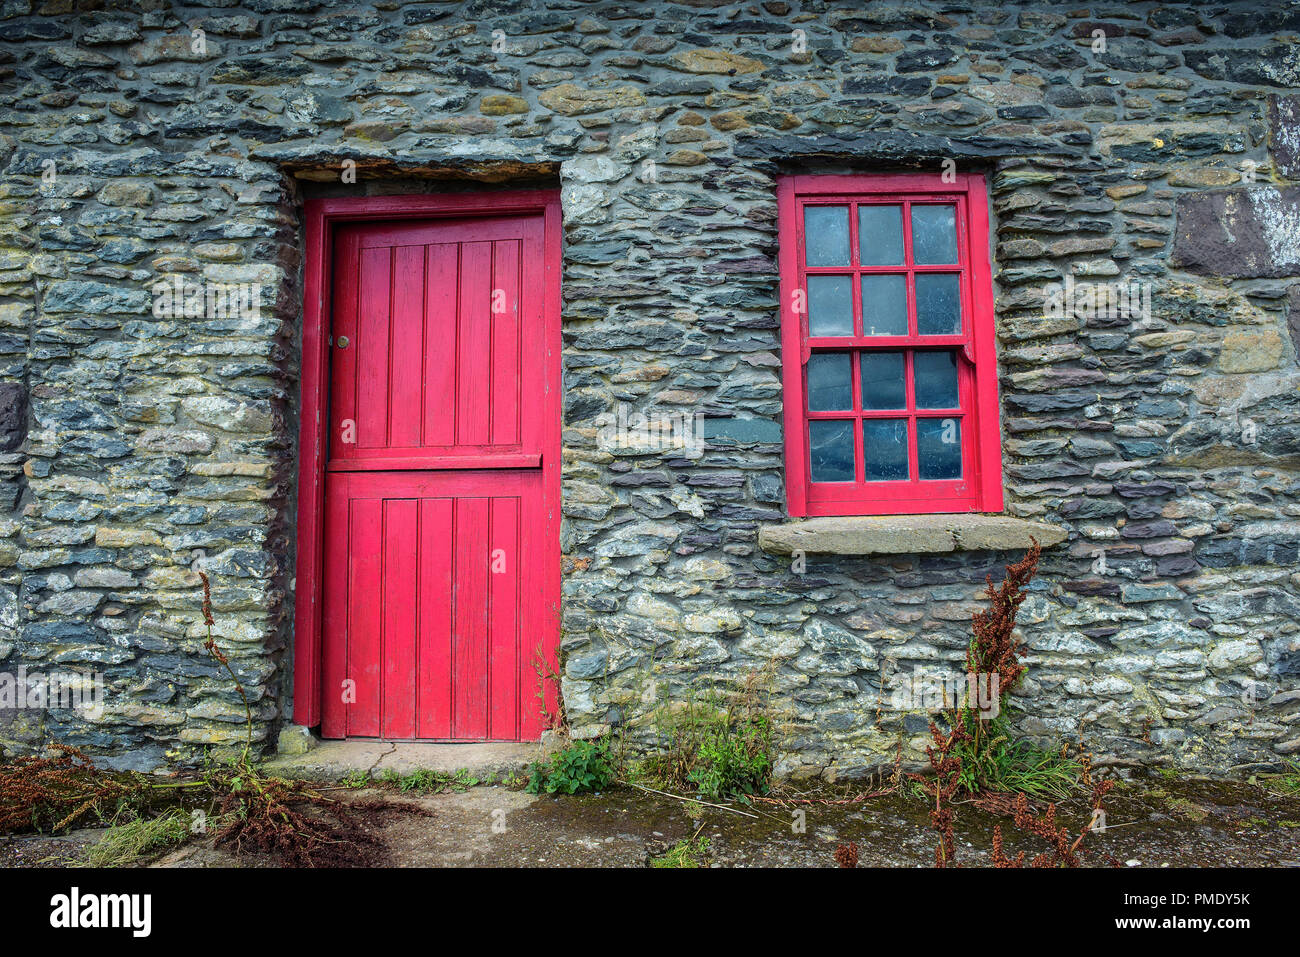 A vintage door and window on a facade of an old cottage built of stones in Ireland Stock Photo